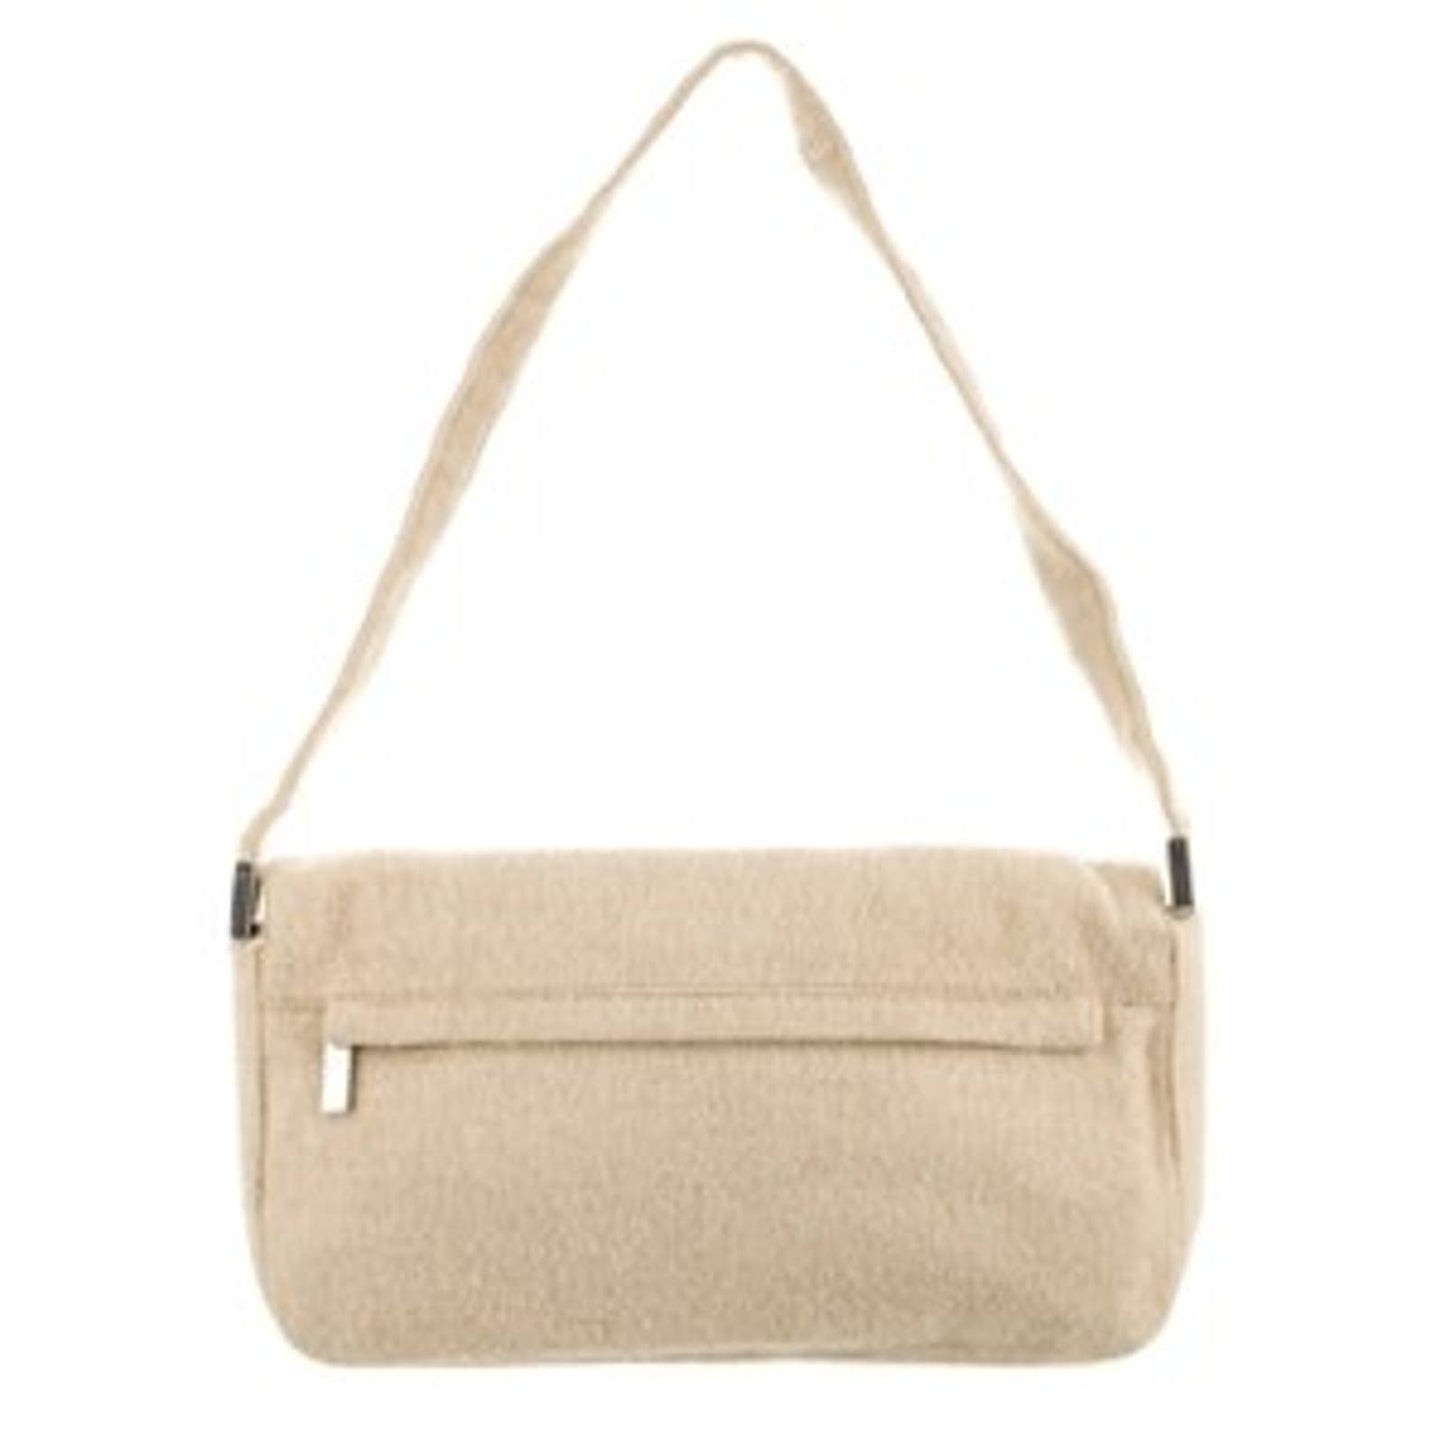 SERGIO ROSSI Beige Wool with Multicolor Embroidery and Beads Shoulder Bag